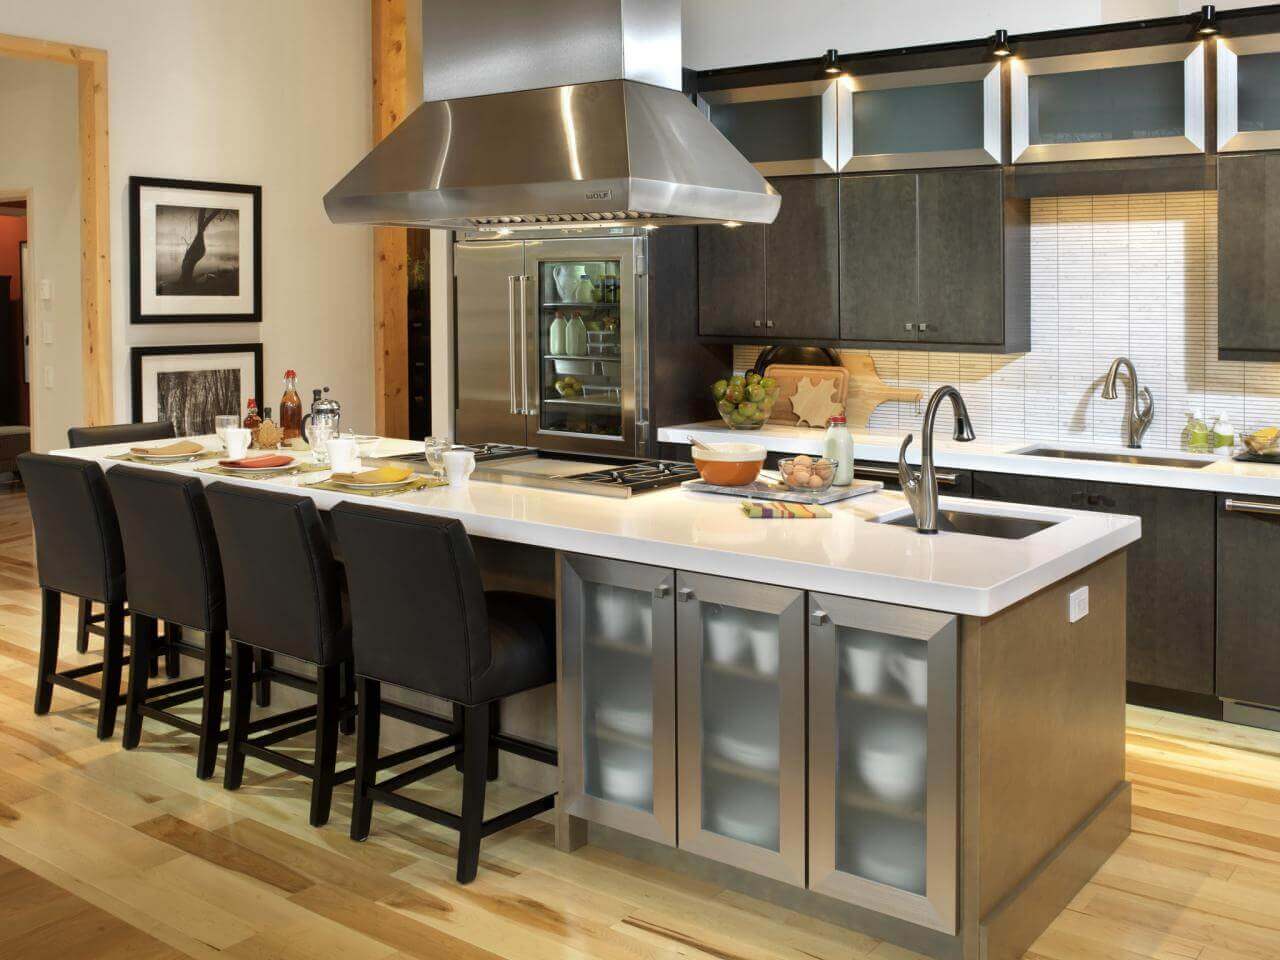 Kitchen Island with Stove Top: Design and Considerations缩略图